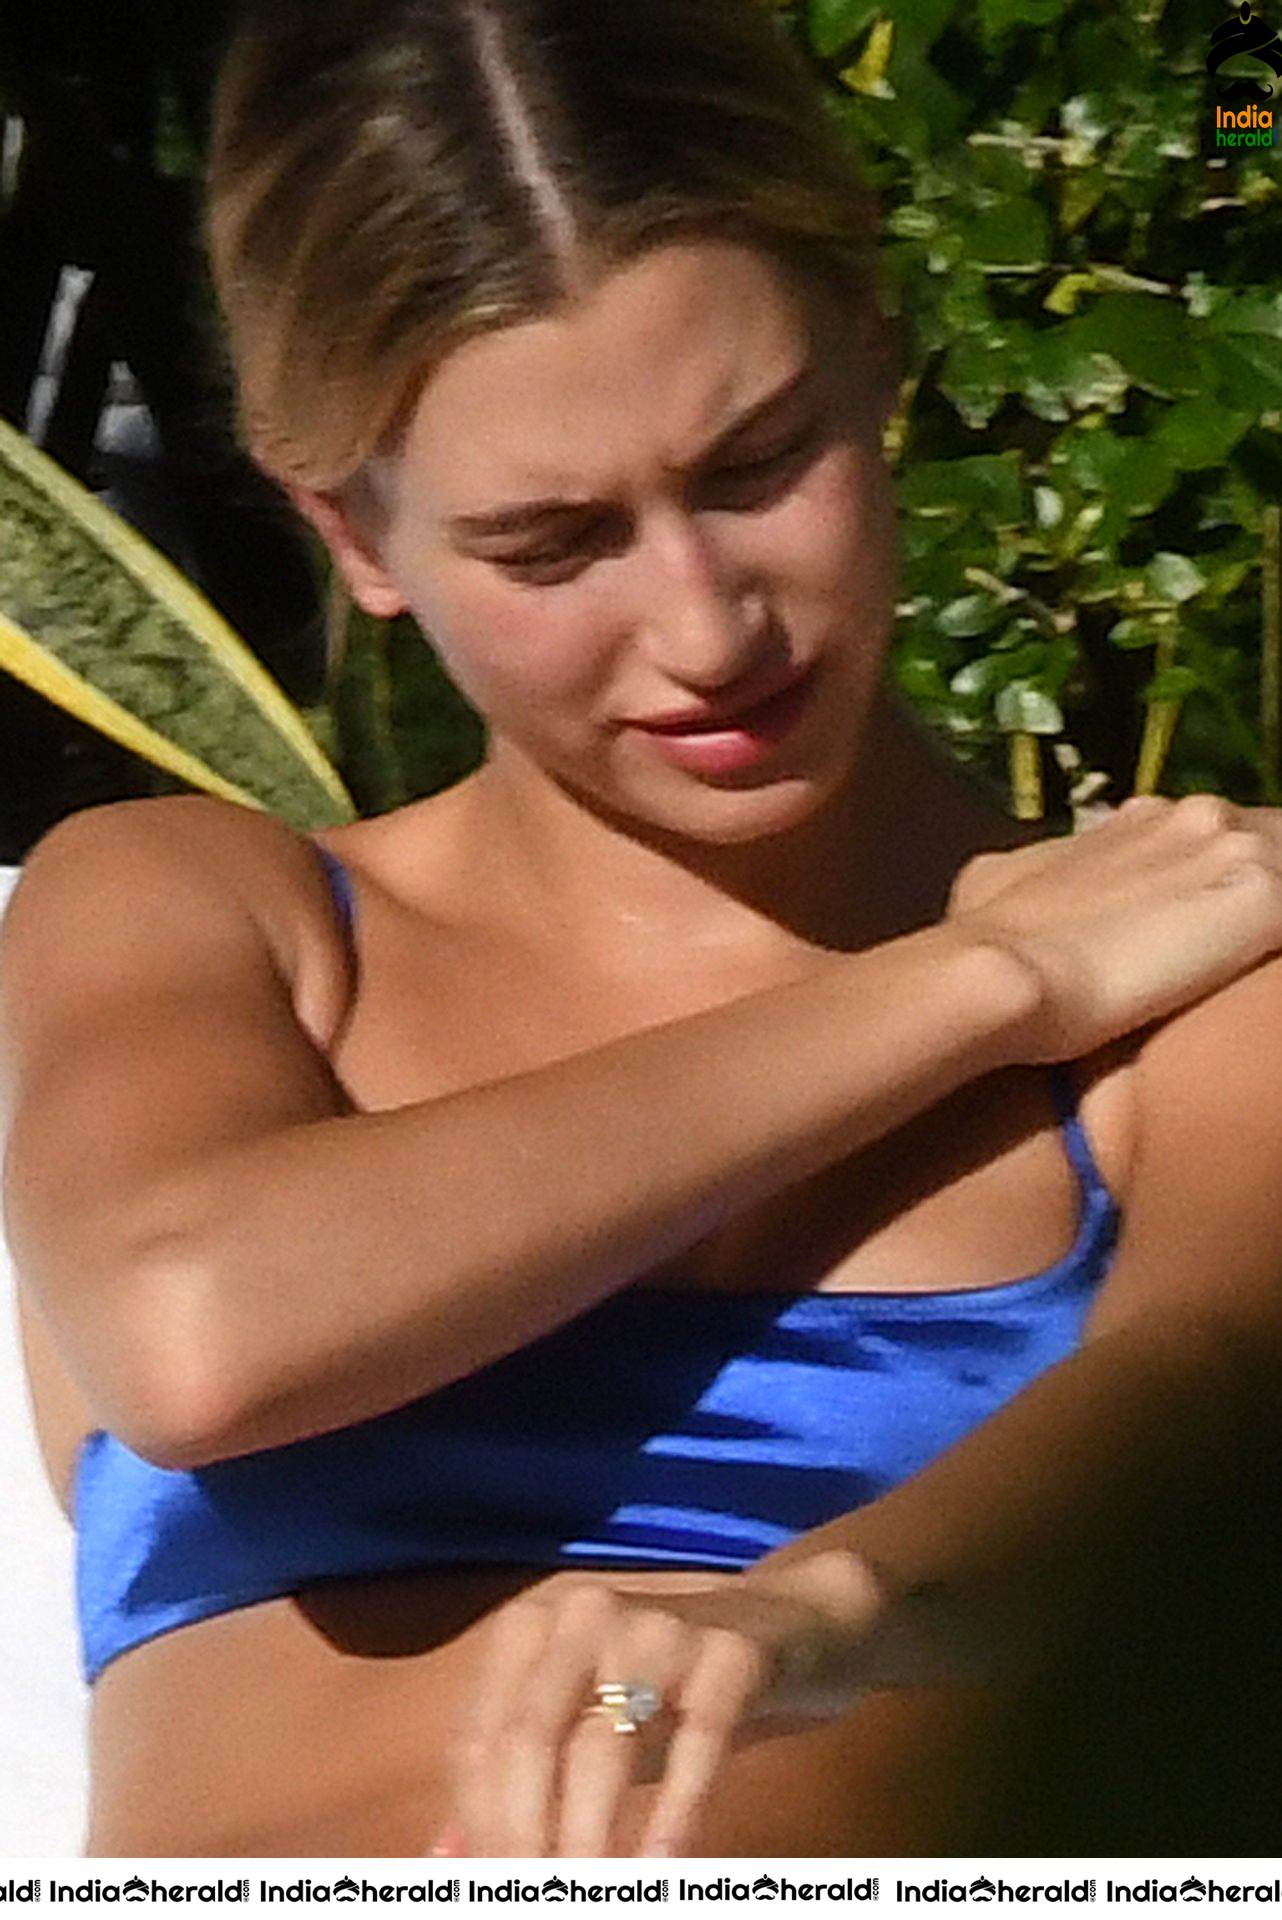 Hailey Bieber is enjoying some downtime by the pool in Miami